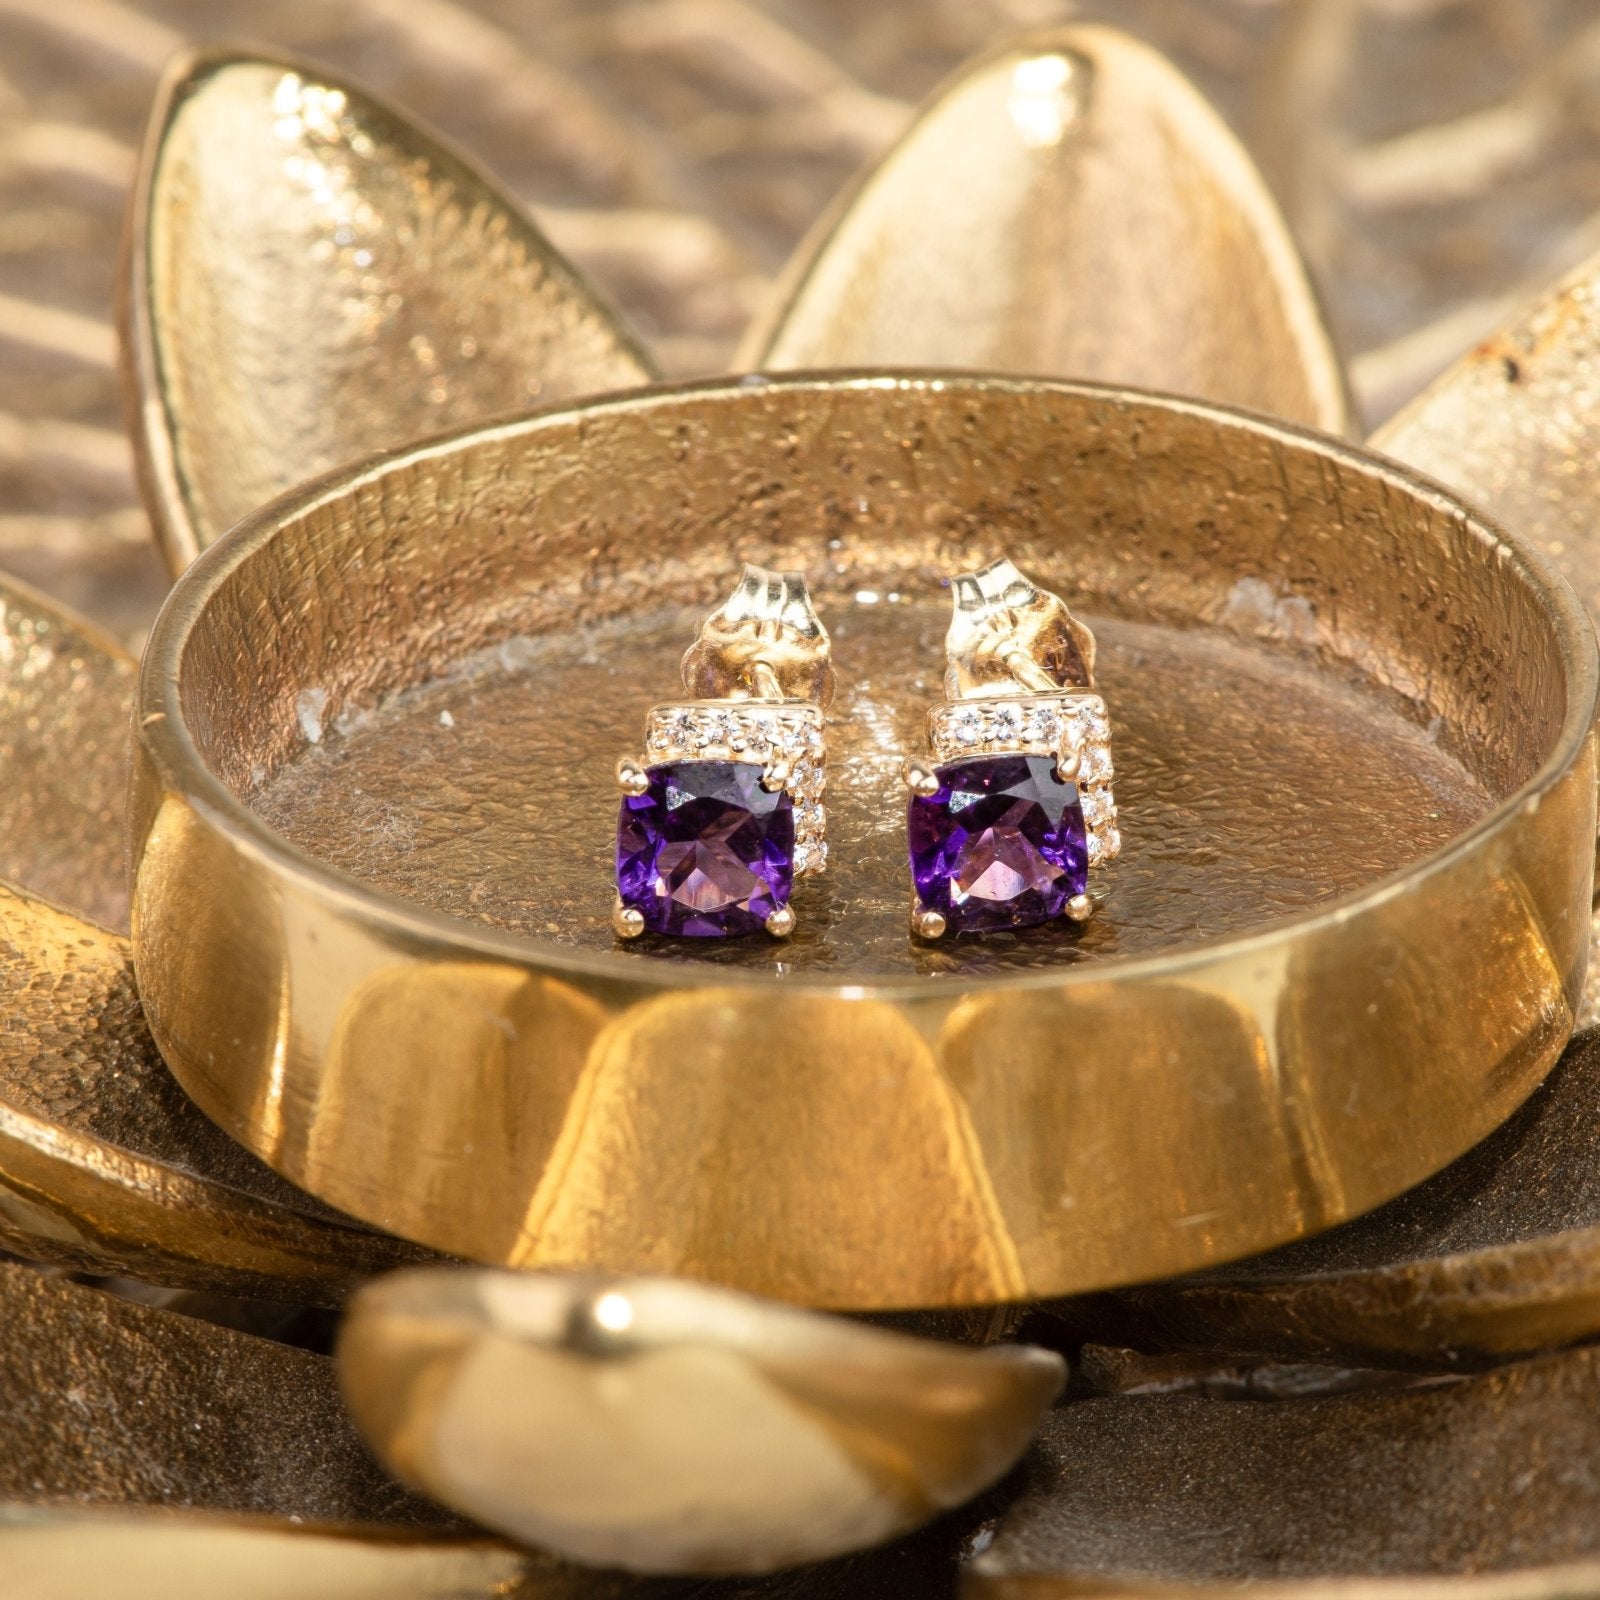 Cushion Cut Amethyst Studs with White Sapphire Pave Accent Earrings Estella Collection #product_description# 32660 Amethyst Colorless Gemstone Made to Order #tag4# #tag5# #tag6# #tag7# #tag8# #tag9# #tag10#